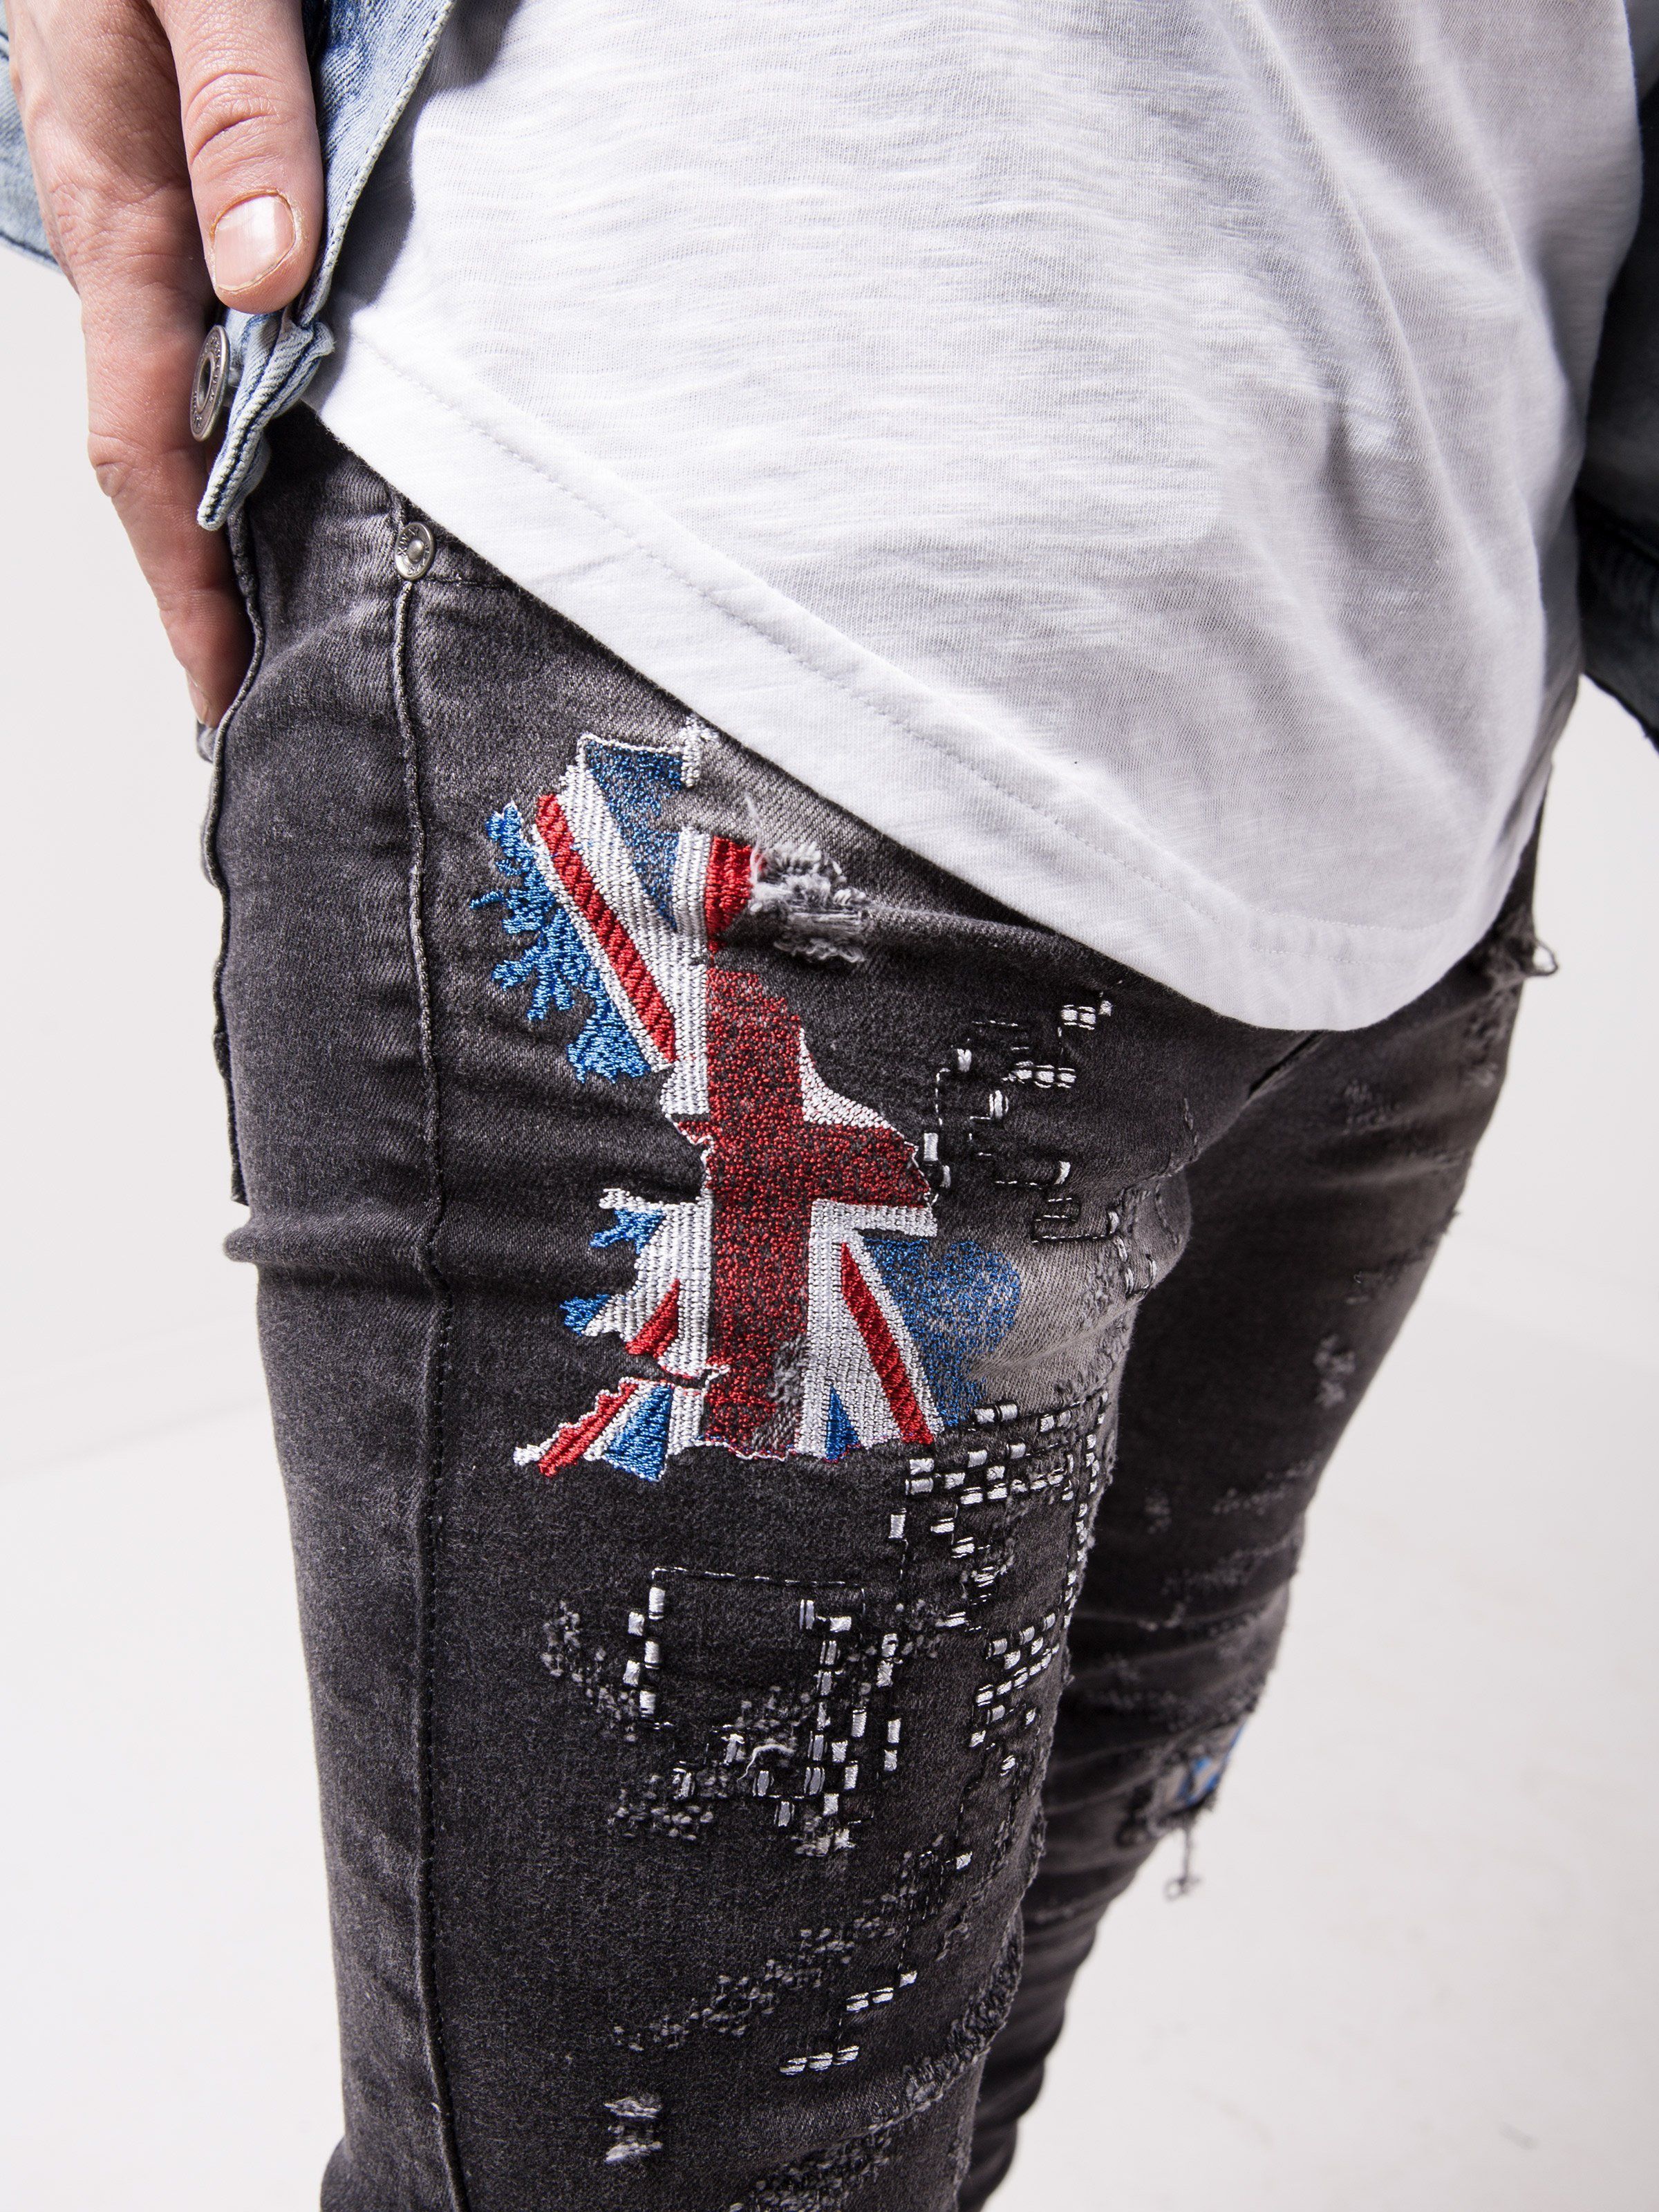 A man wearing a pair of BIG BEN jeans with a union jack patch.